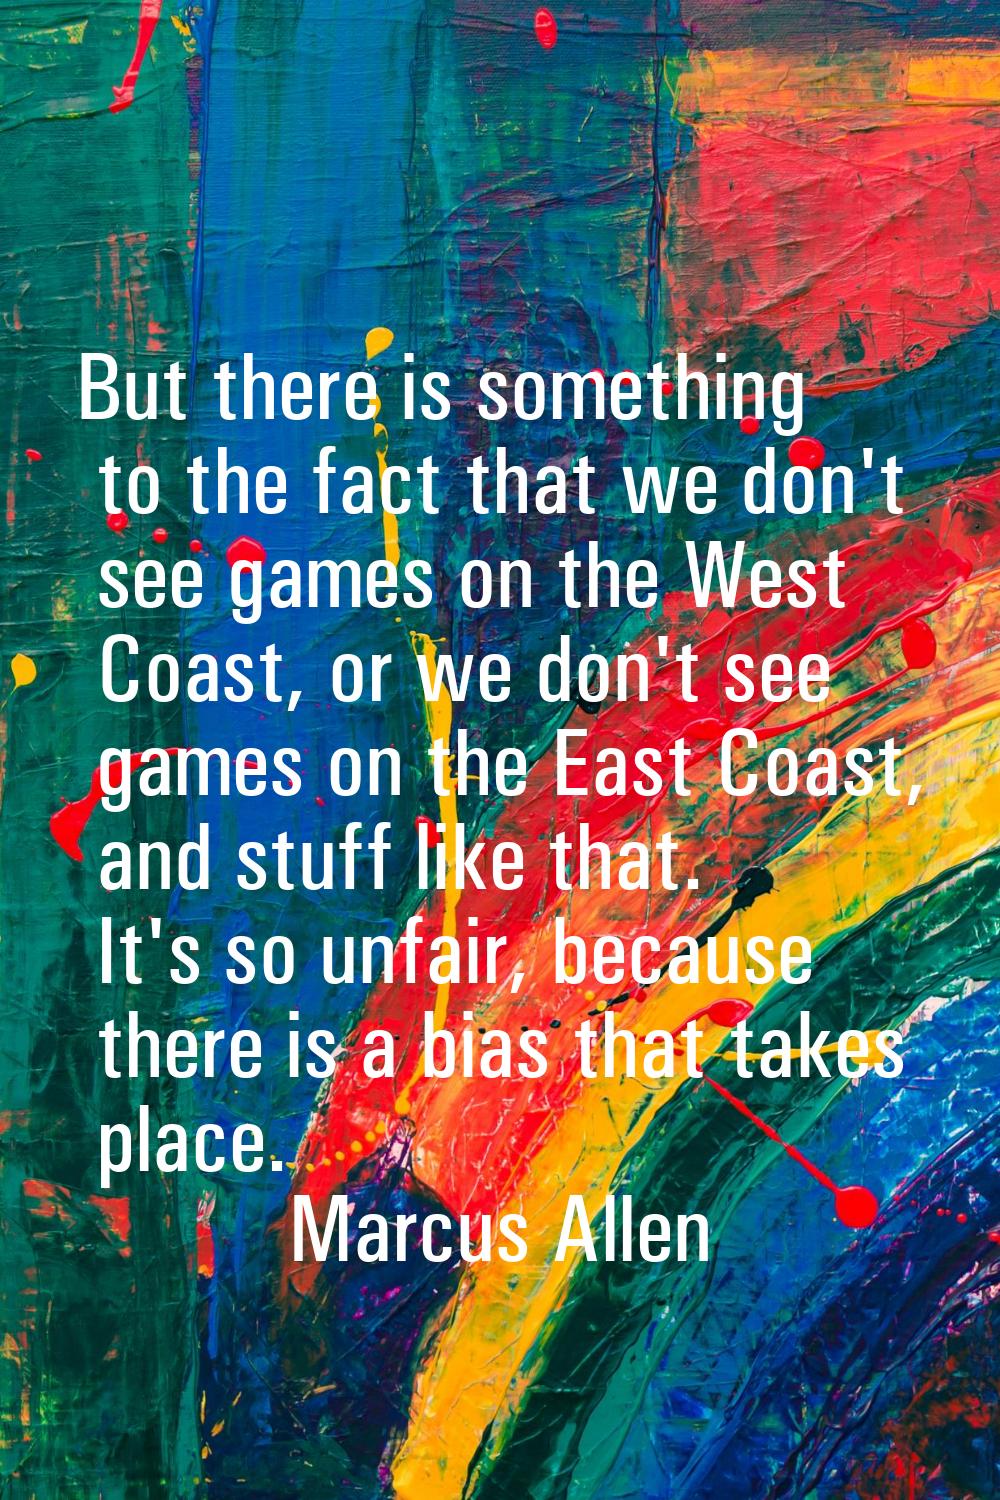 But there is something to the fact that we don't see games on the West Coast, or we don't see games